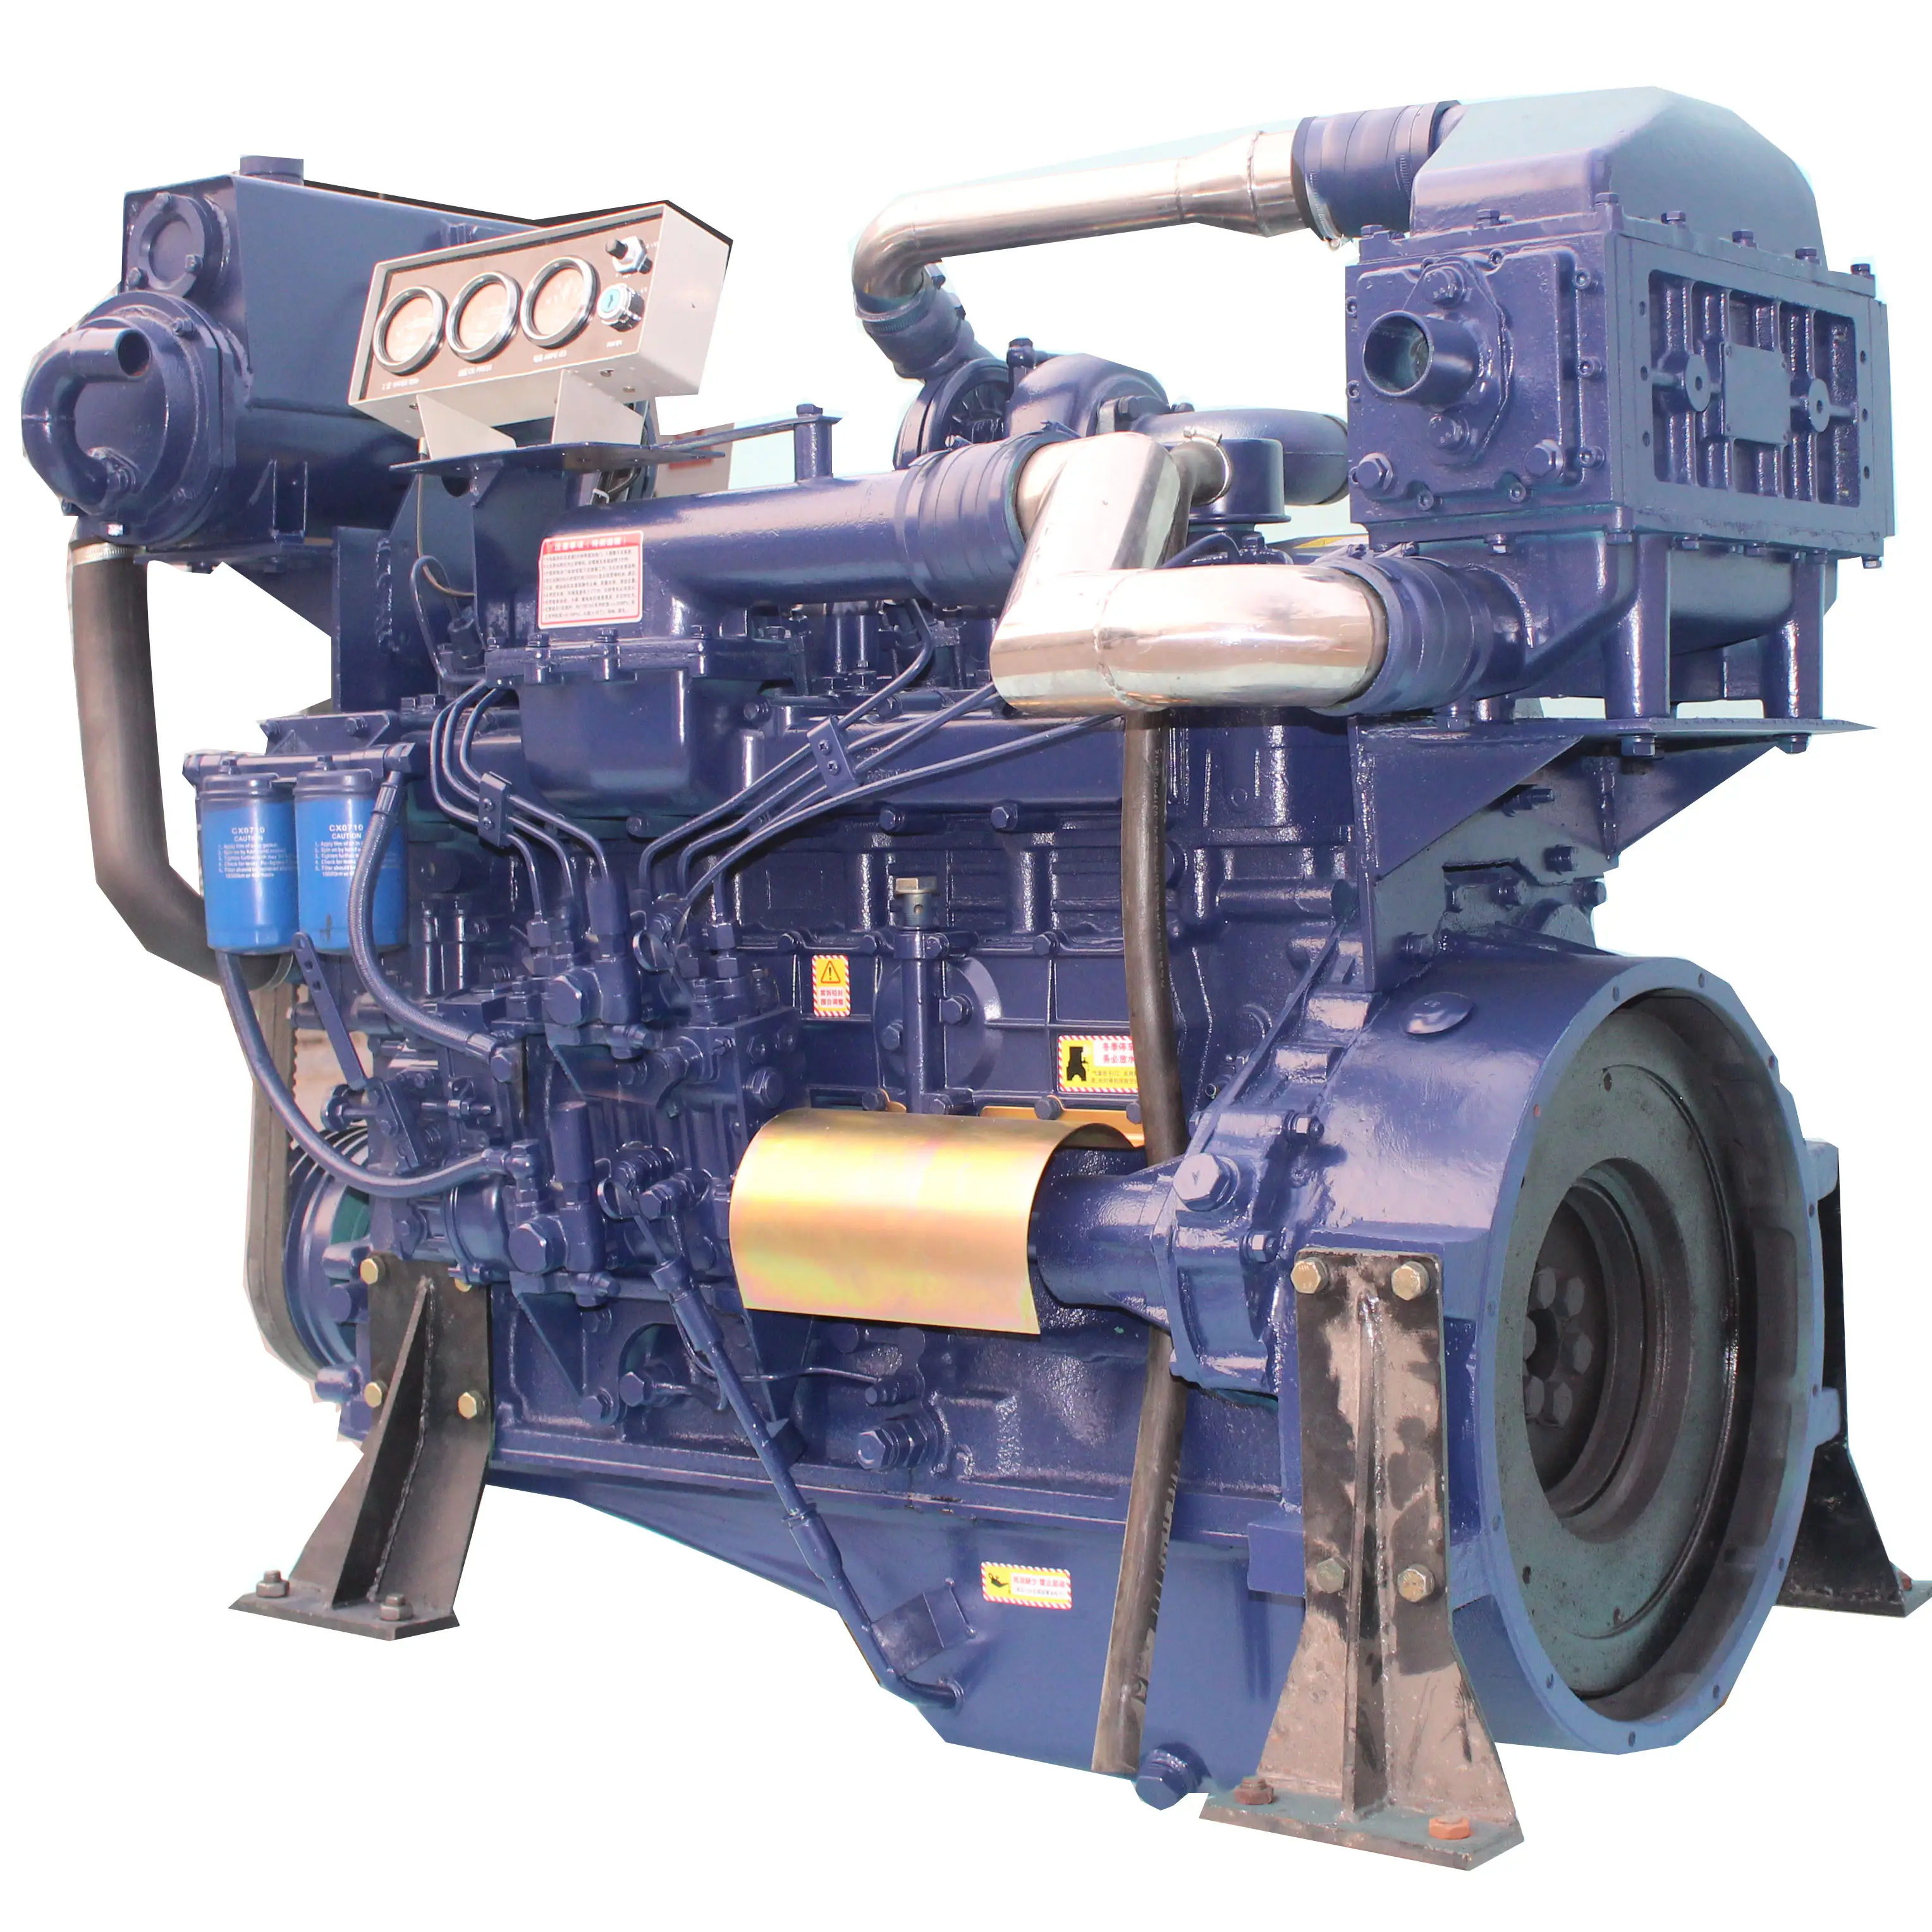 354hp/260kw <span class=keywords><strong>4</strong></span> temps <span class=keywords><strong>moteur</strong></span> <span class=keywords><strong>diesel</strong></span> pour groupe électrogène